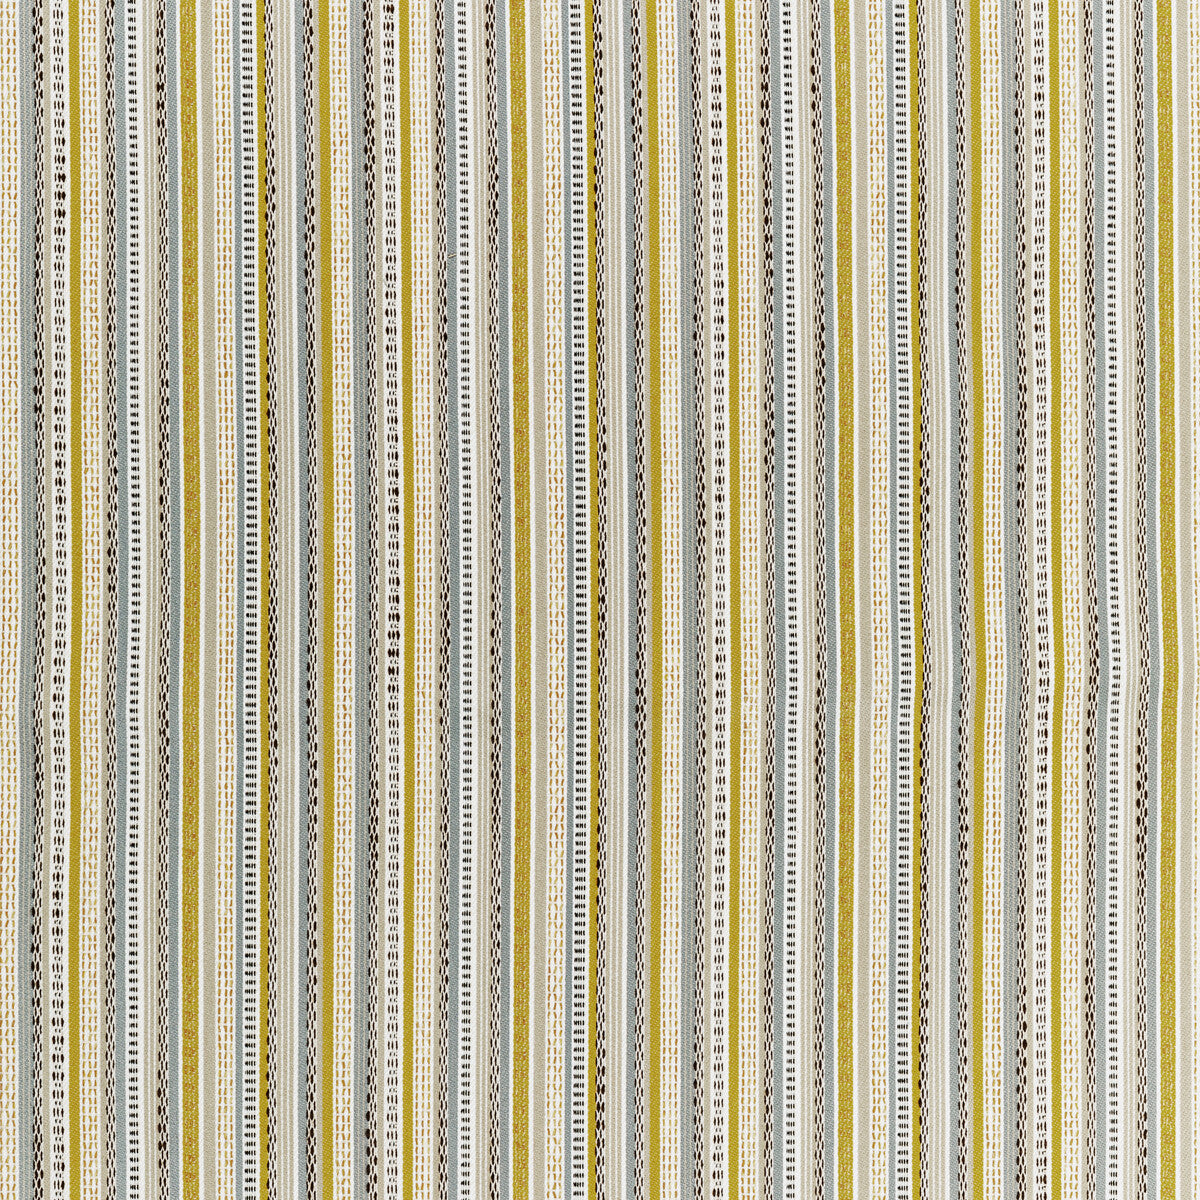 Kisco fabric in citron color - pattern 36264.411.0 - by Kravet Contract in the Gis Crypton collection